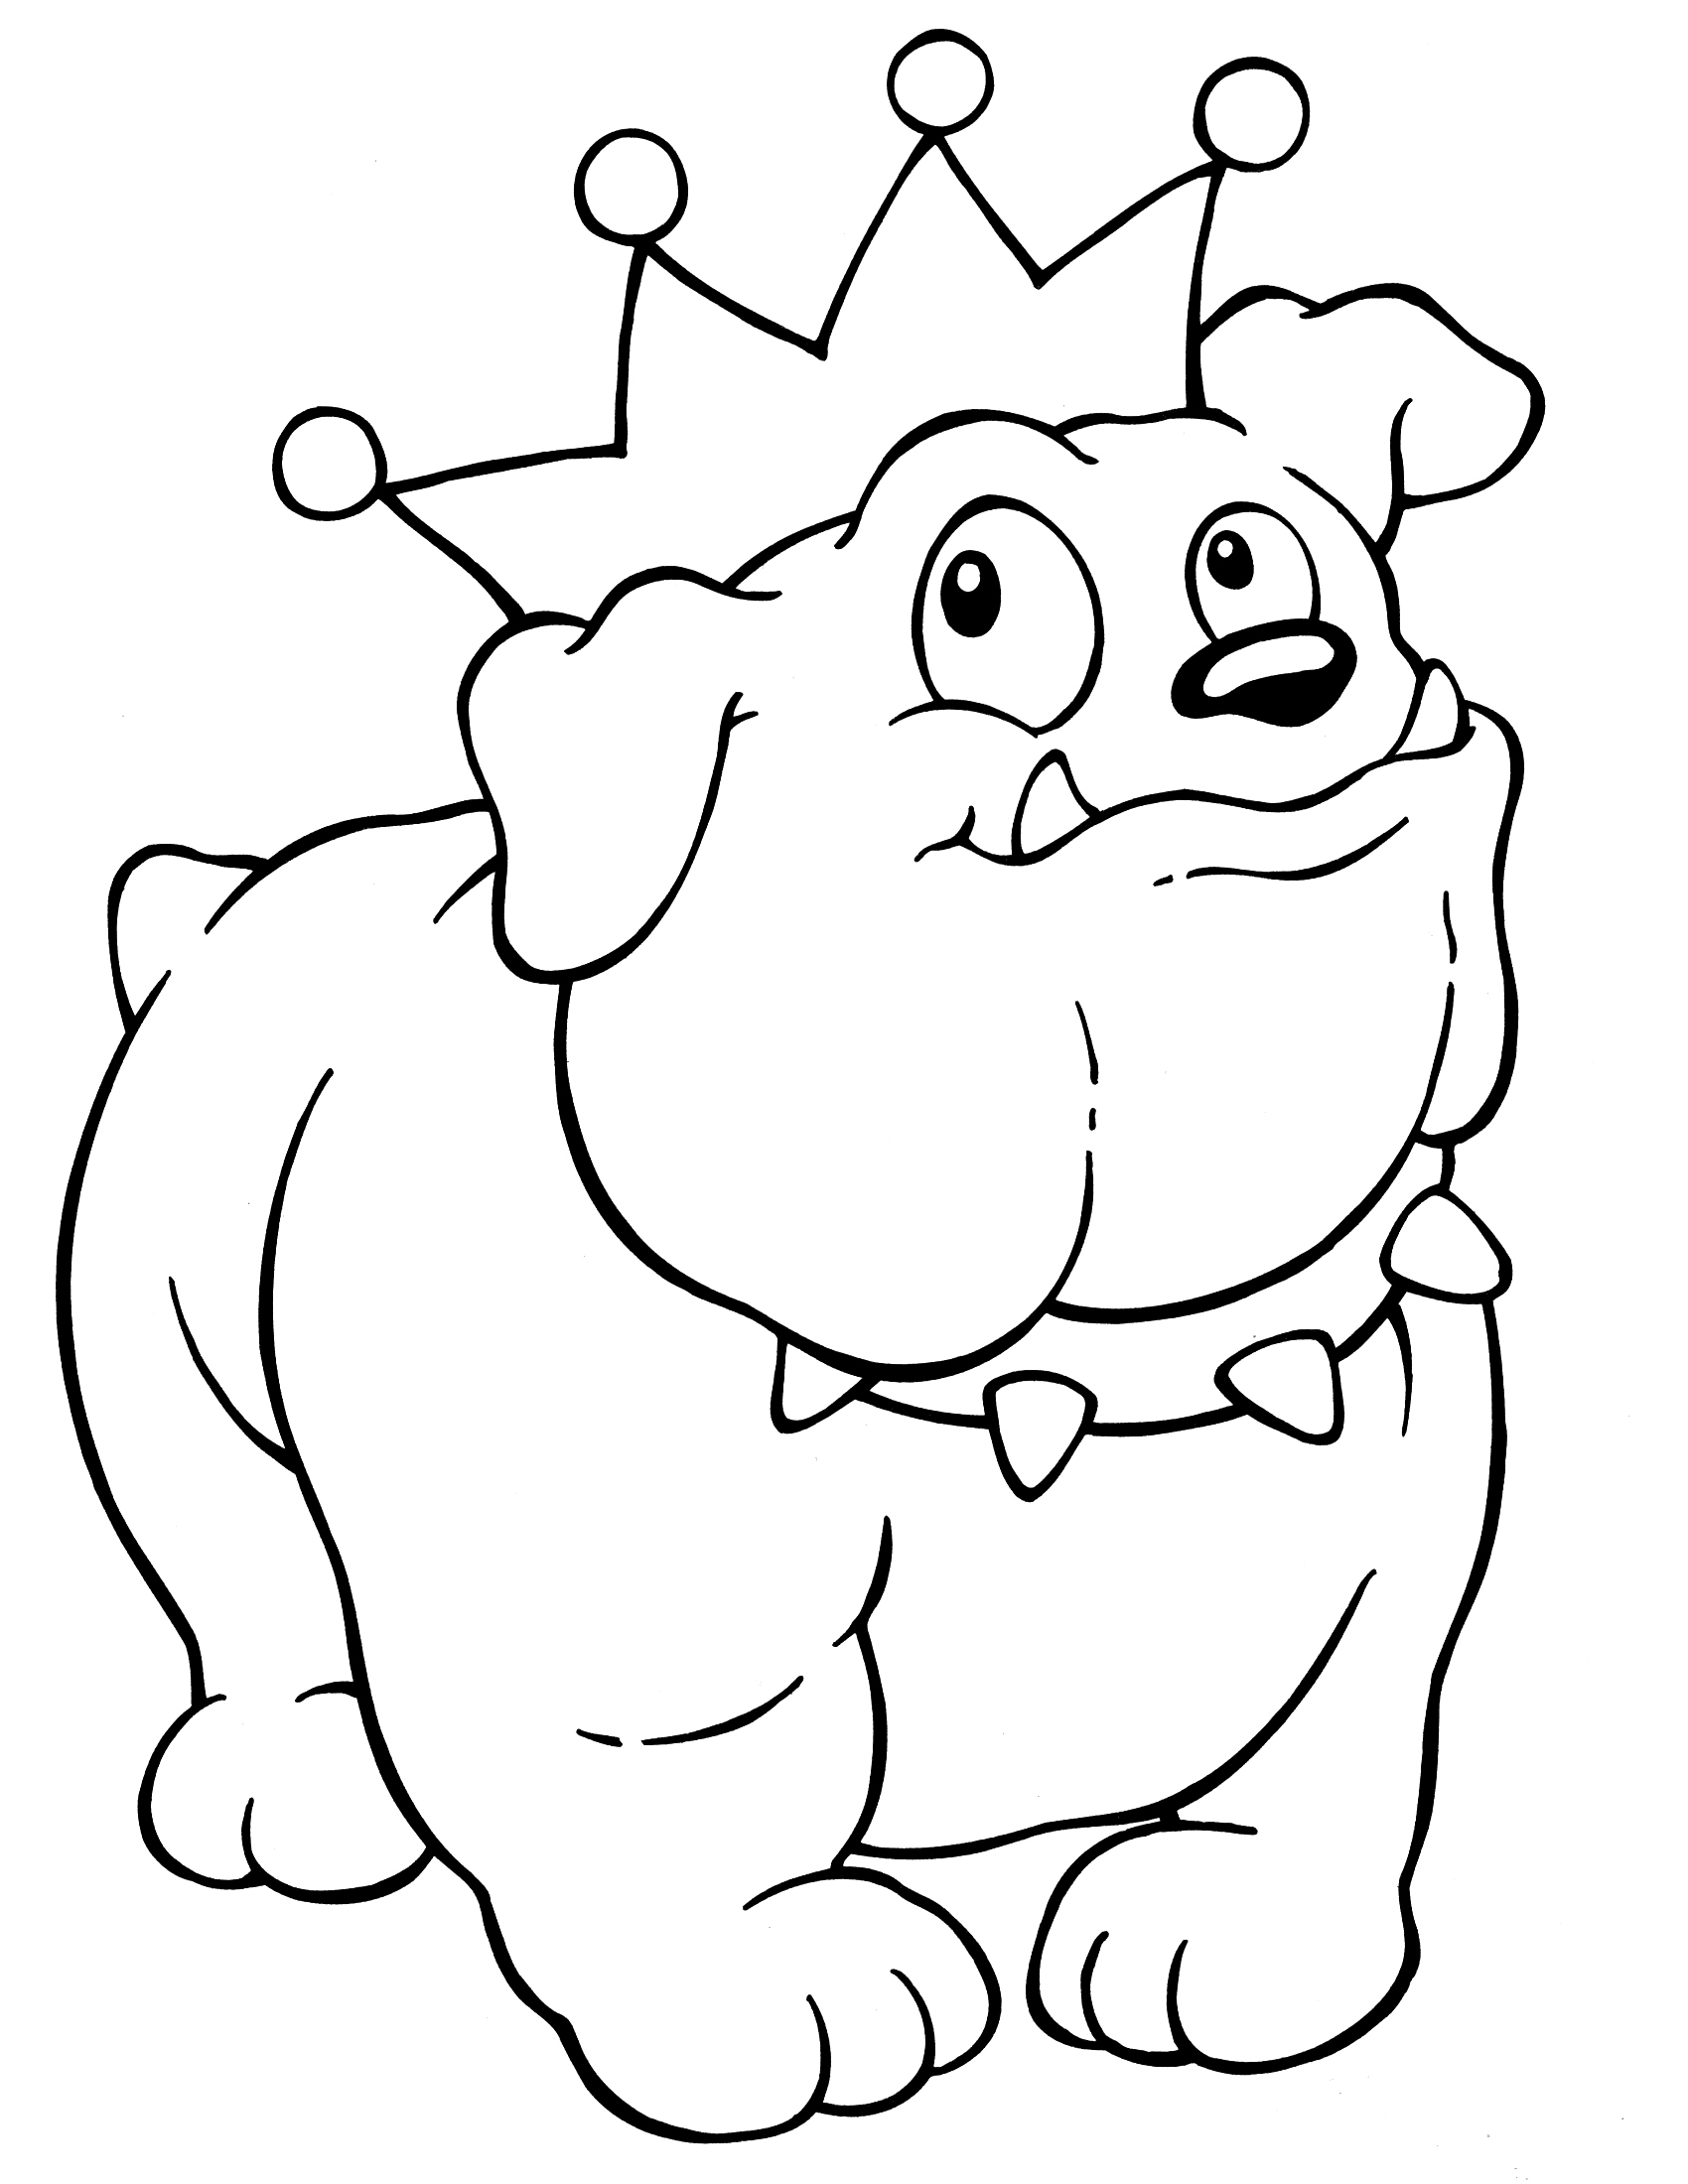 Crayola Printable Disney Coloring Pages Coloring Pages